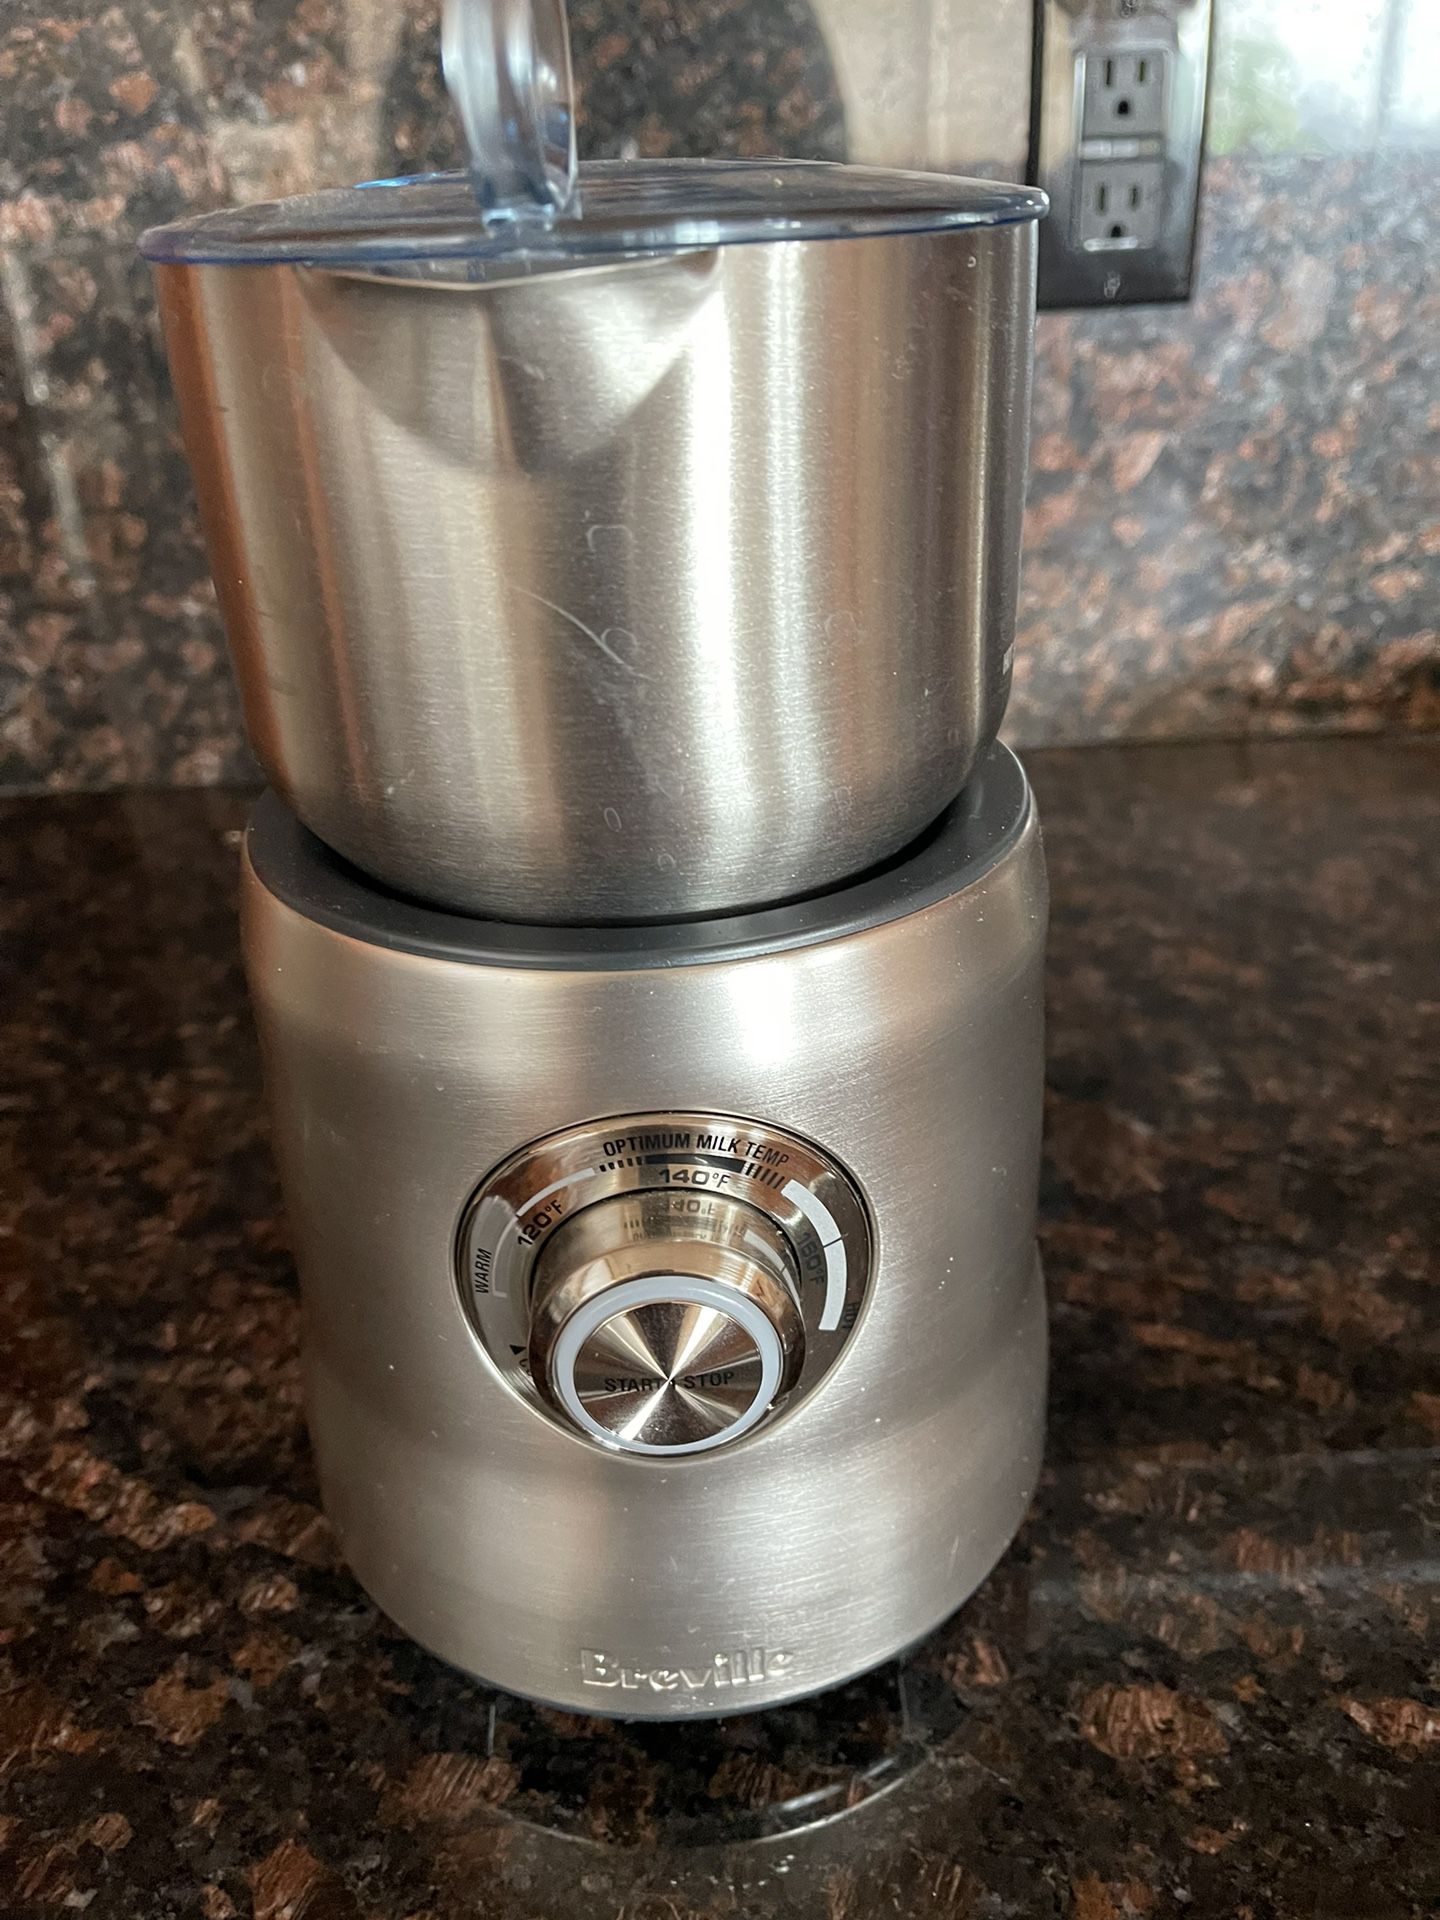 Breville Milk Cafe Frother for Sale in Bothell, WA - OfferUp